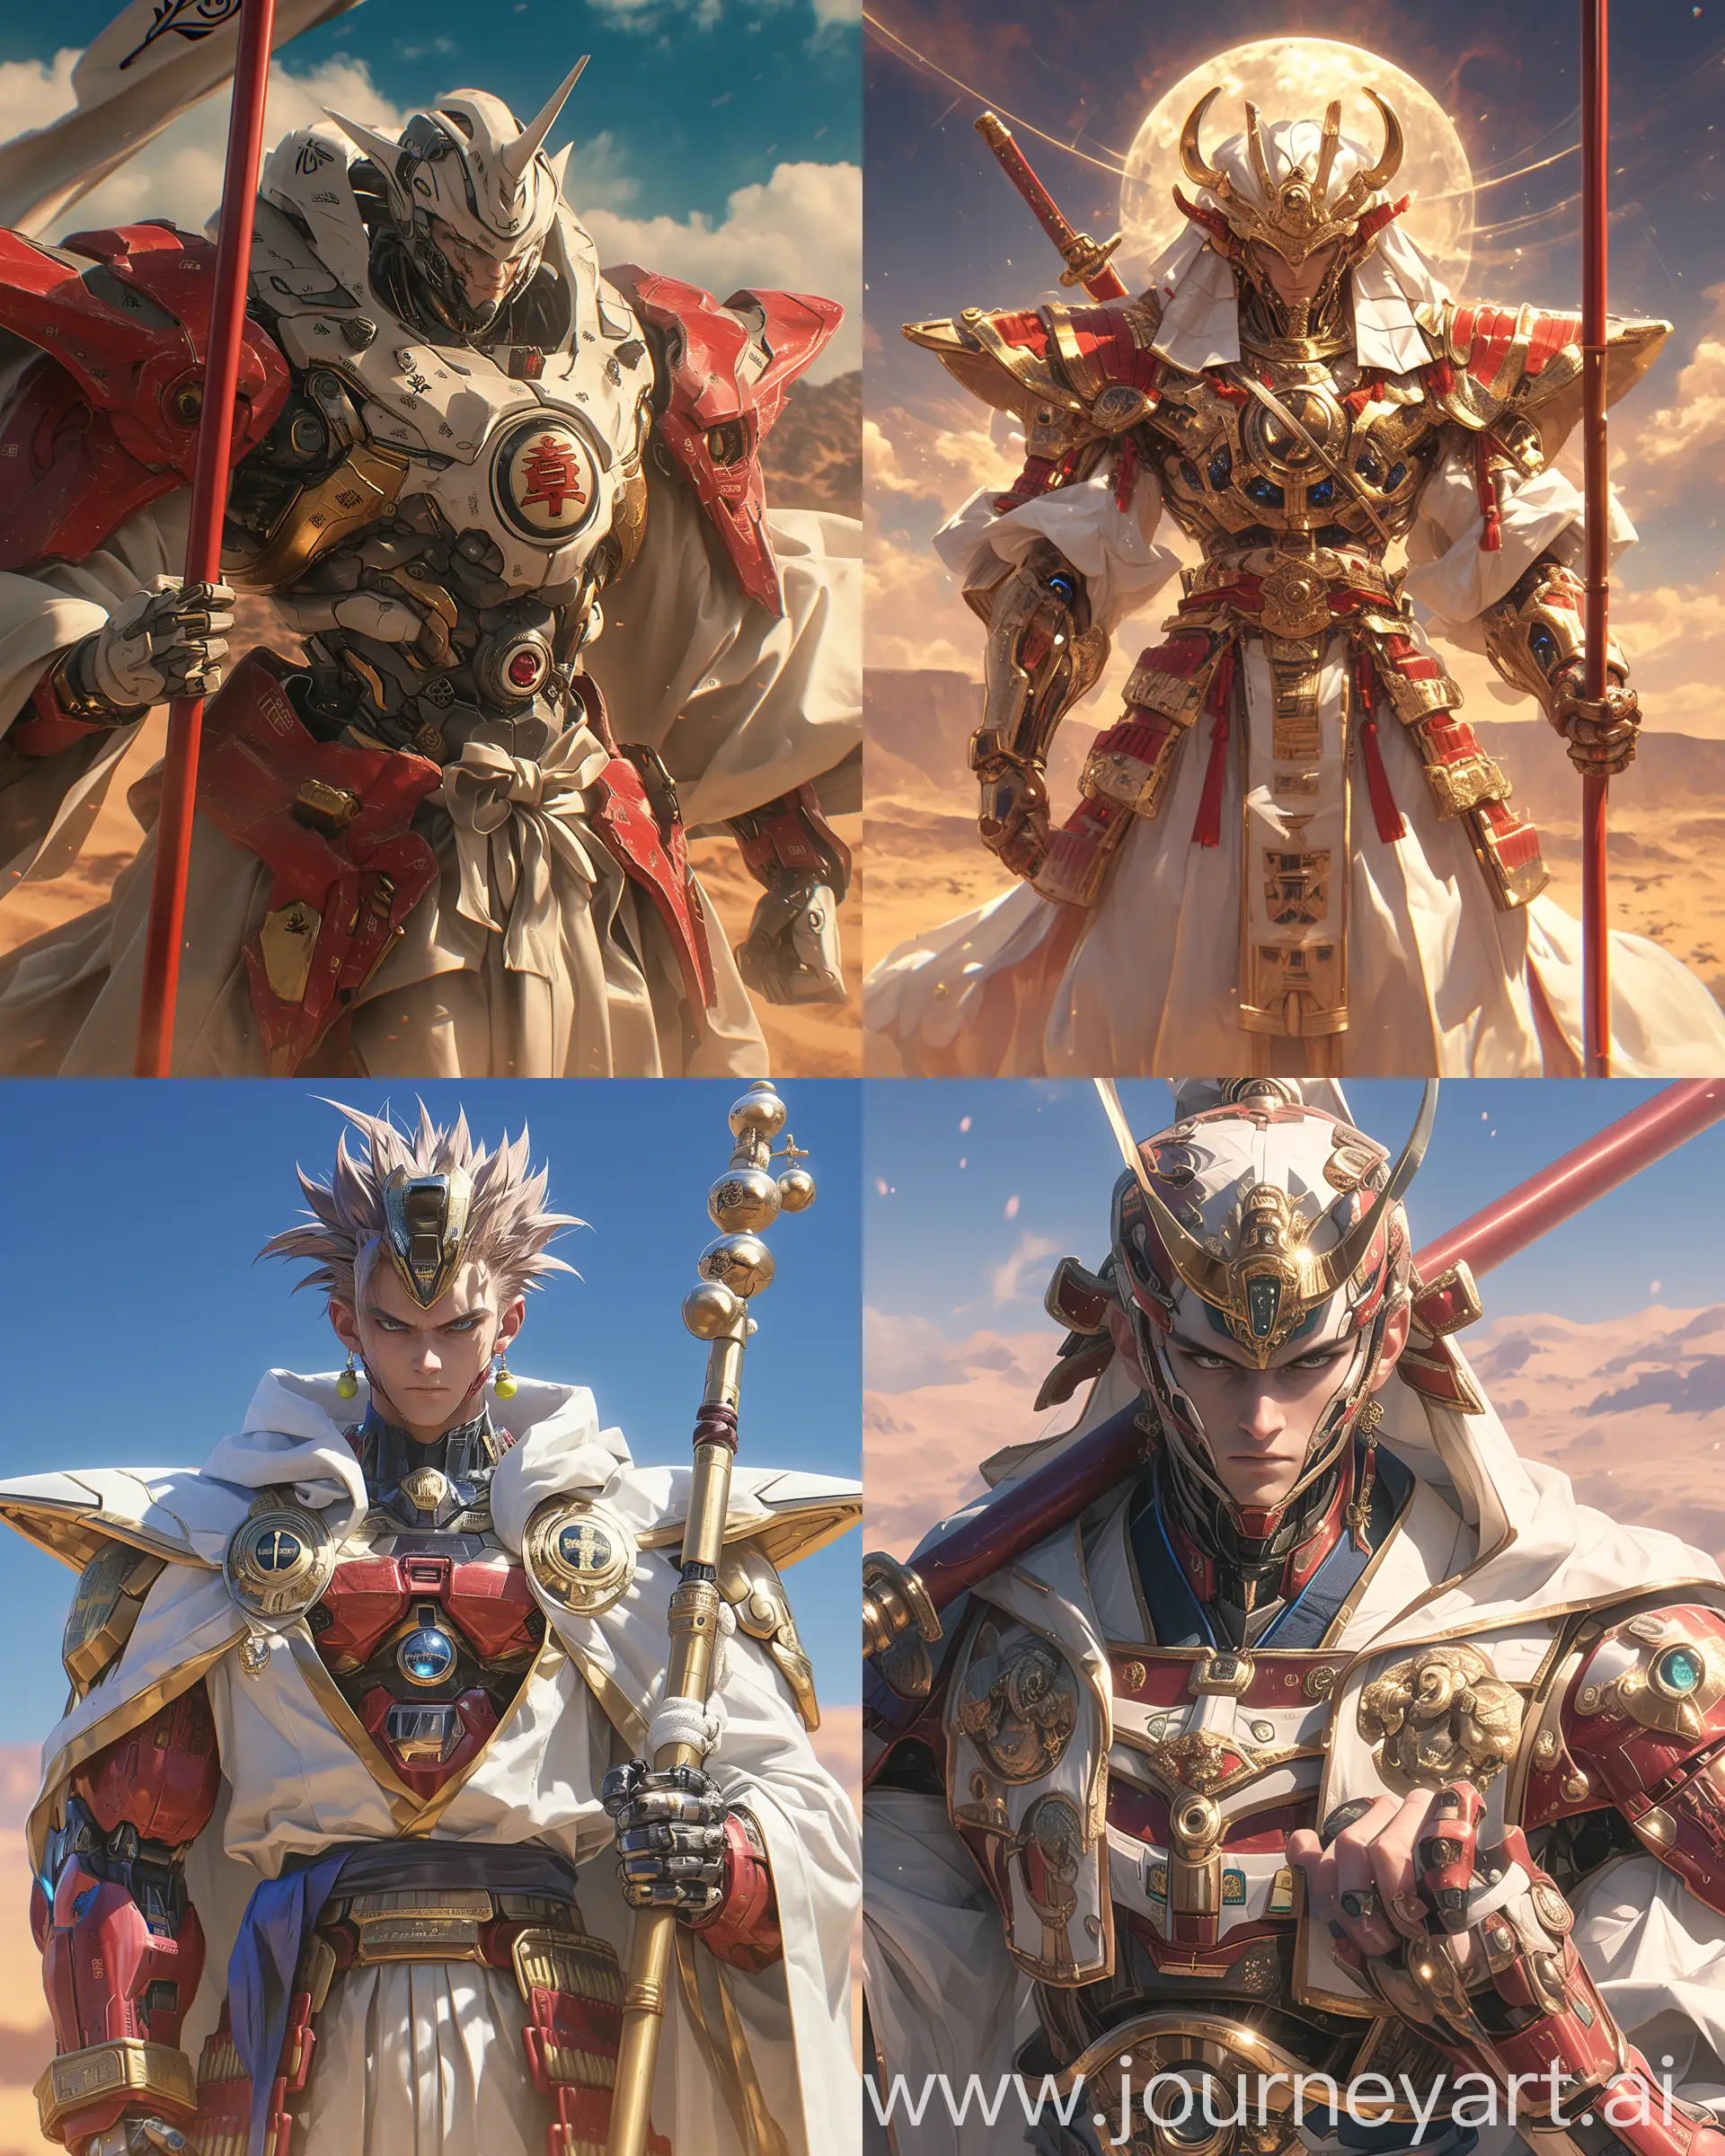 there is a rea; ancient Egyptian real man god Goku from dragon ball world in a white and gold high luxury samurai suit holding a sowrd ,Depth of field, powerful male samurai, inspired by Kanō Hōgai, samurai style, dressed in samurai armour, high-tech red armor, wearing techwear and armor, segmented armor and sashimono, very beautiful cyberpunk ancient Egyptian samurai, chinese armor, man in red armor, japanese warrior, desert background, wearing japanese techwear, he still goku from dragon ball world --niji 6 --ar 4:5 --s 750